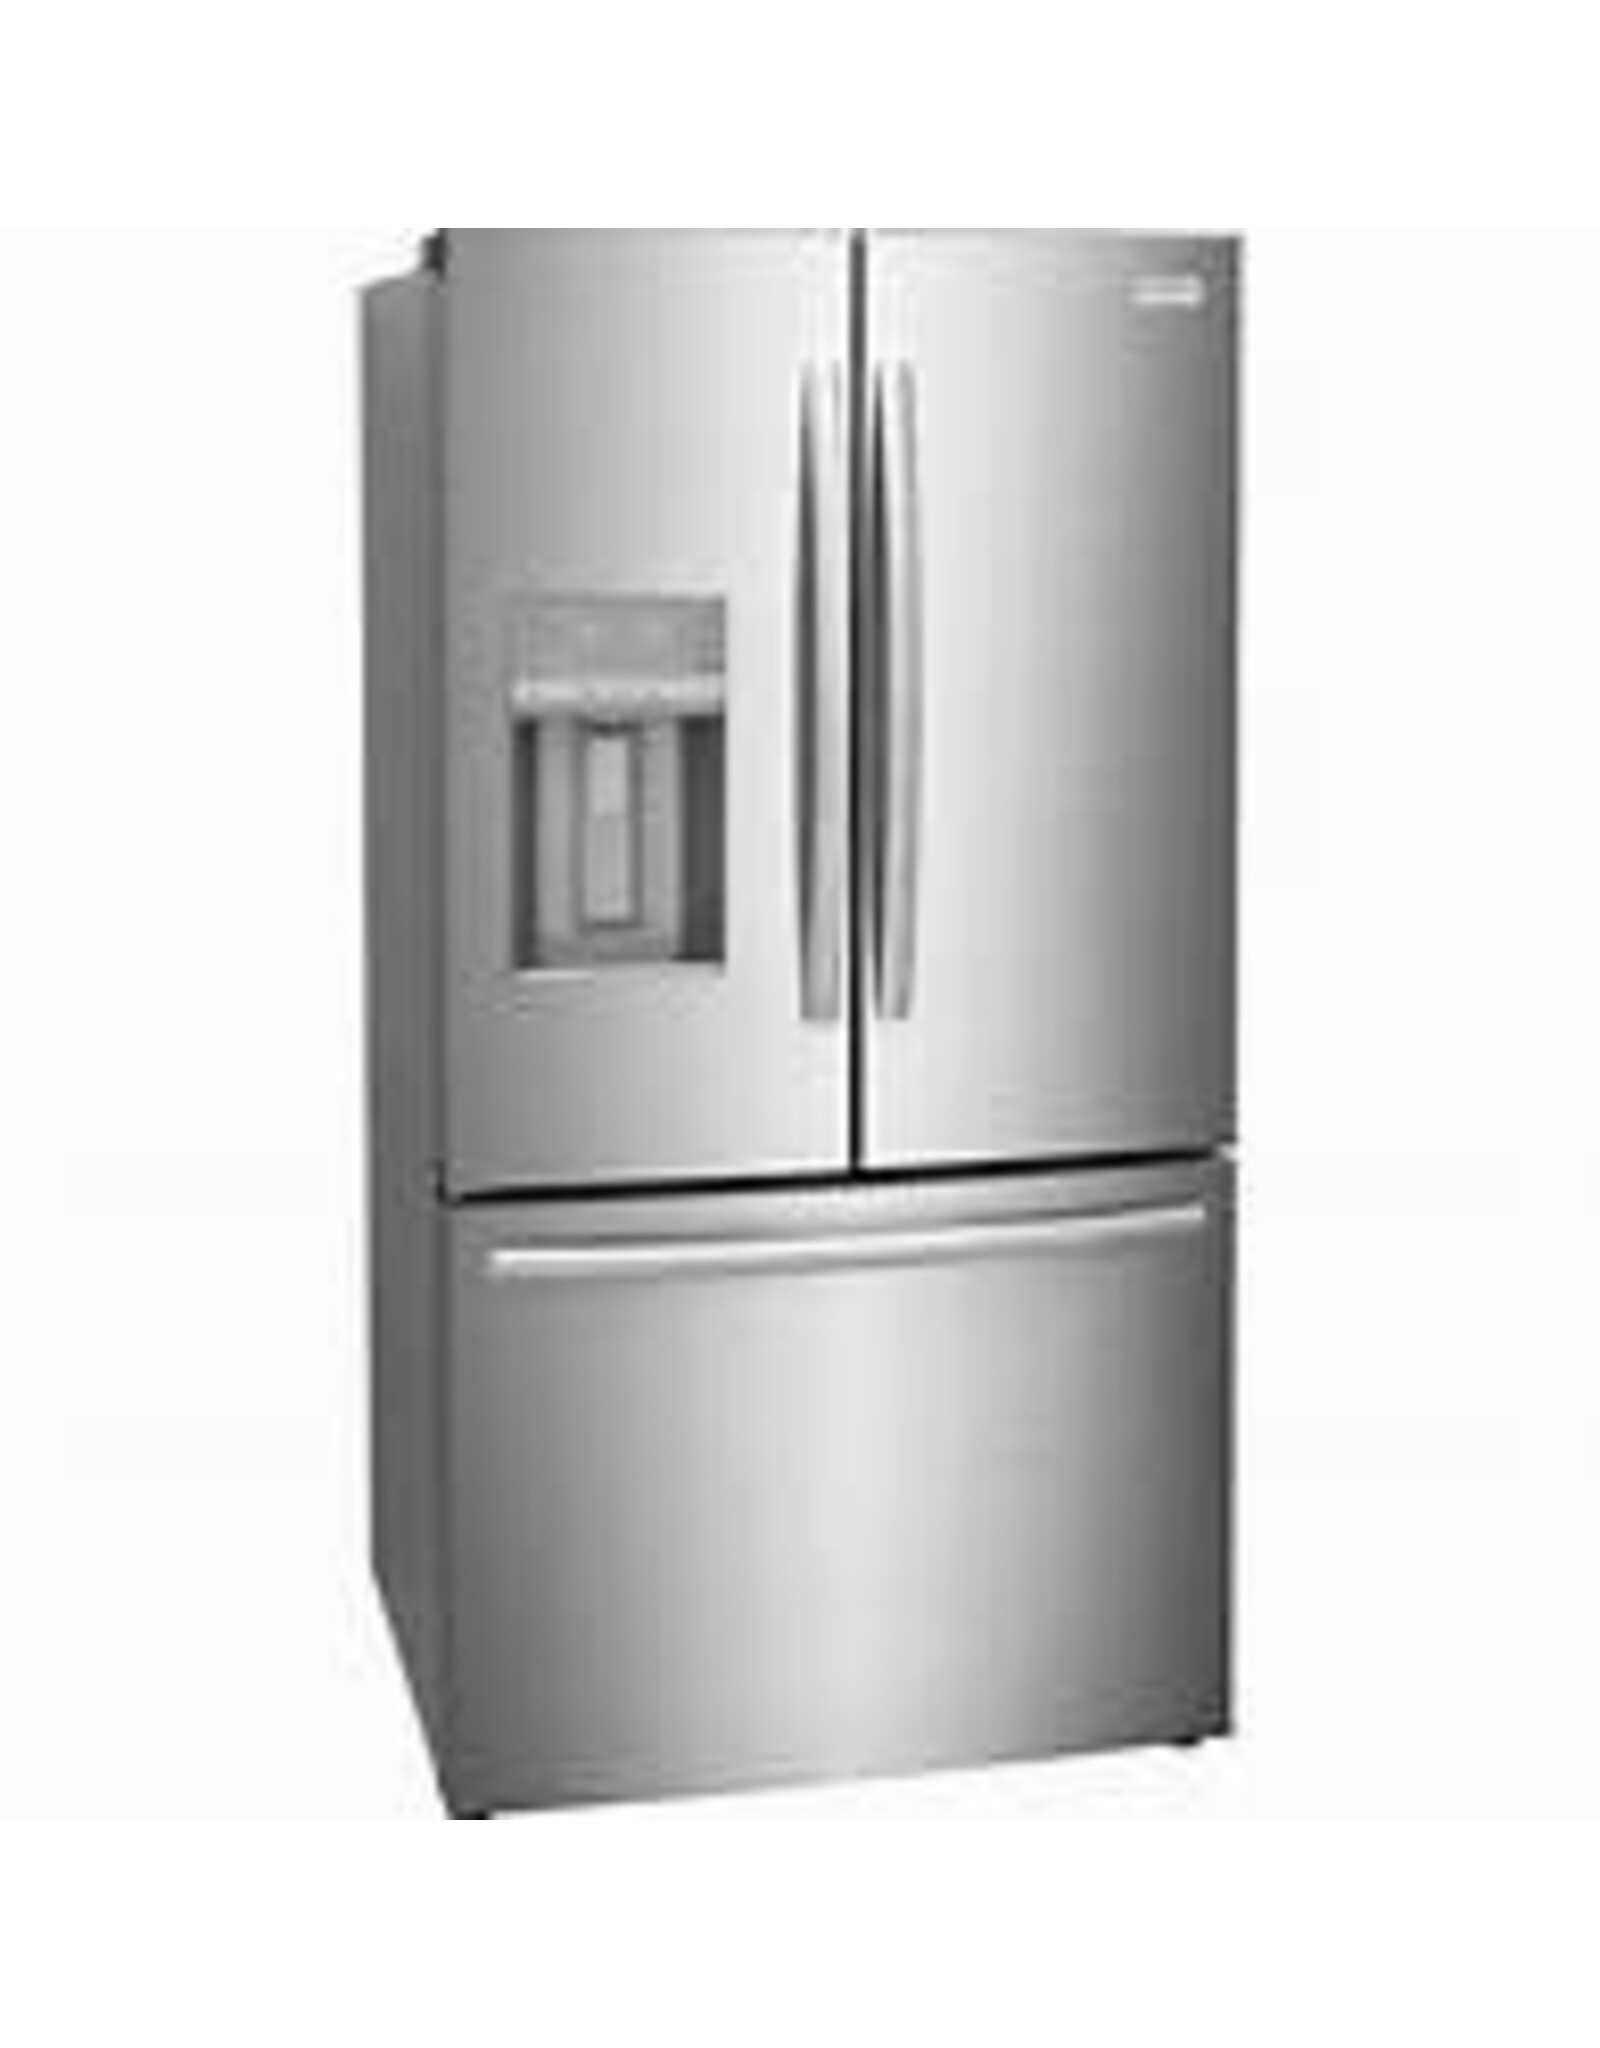 FRIGIDAIRE GRFS2853AF 27.8 cu. ft. French Door Refrigerator in Smudge-Proof Stainless Steel